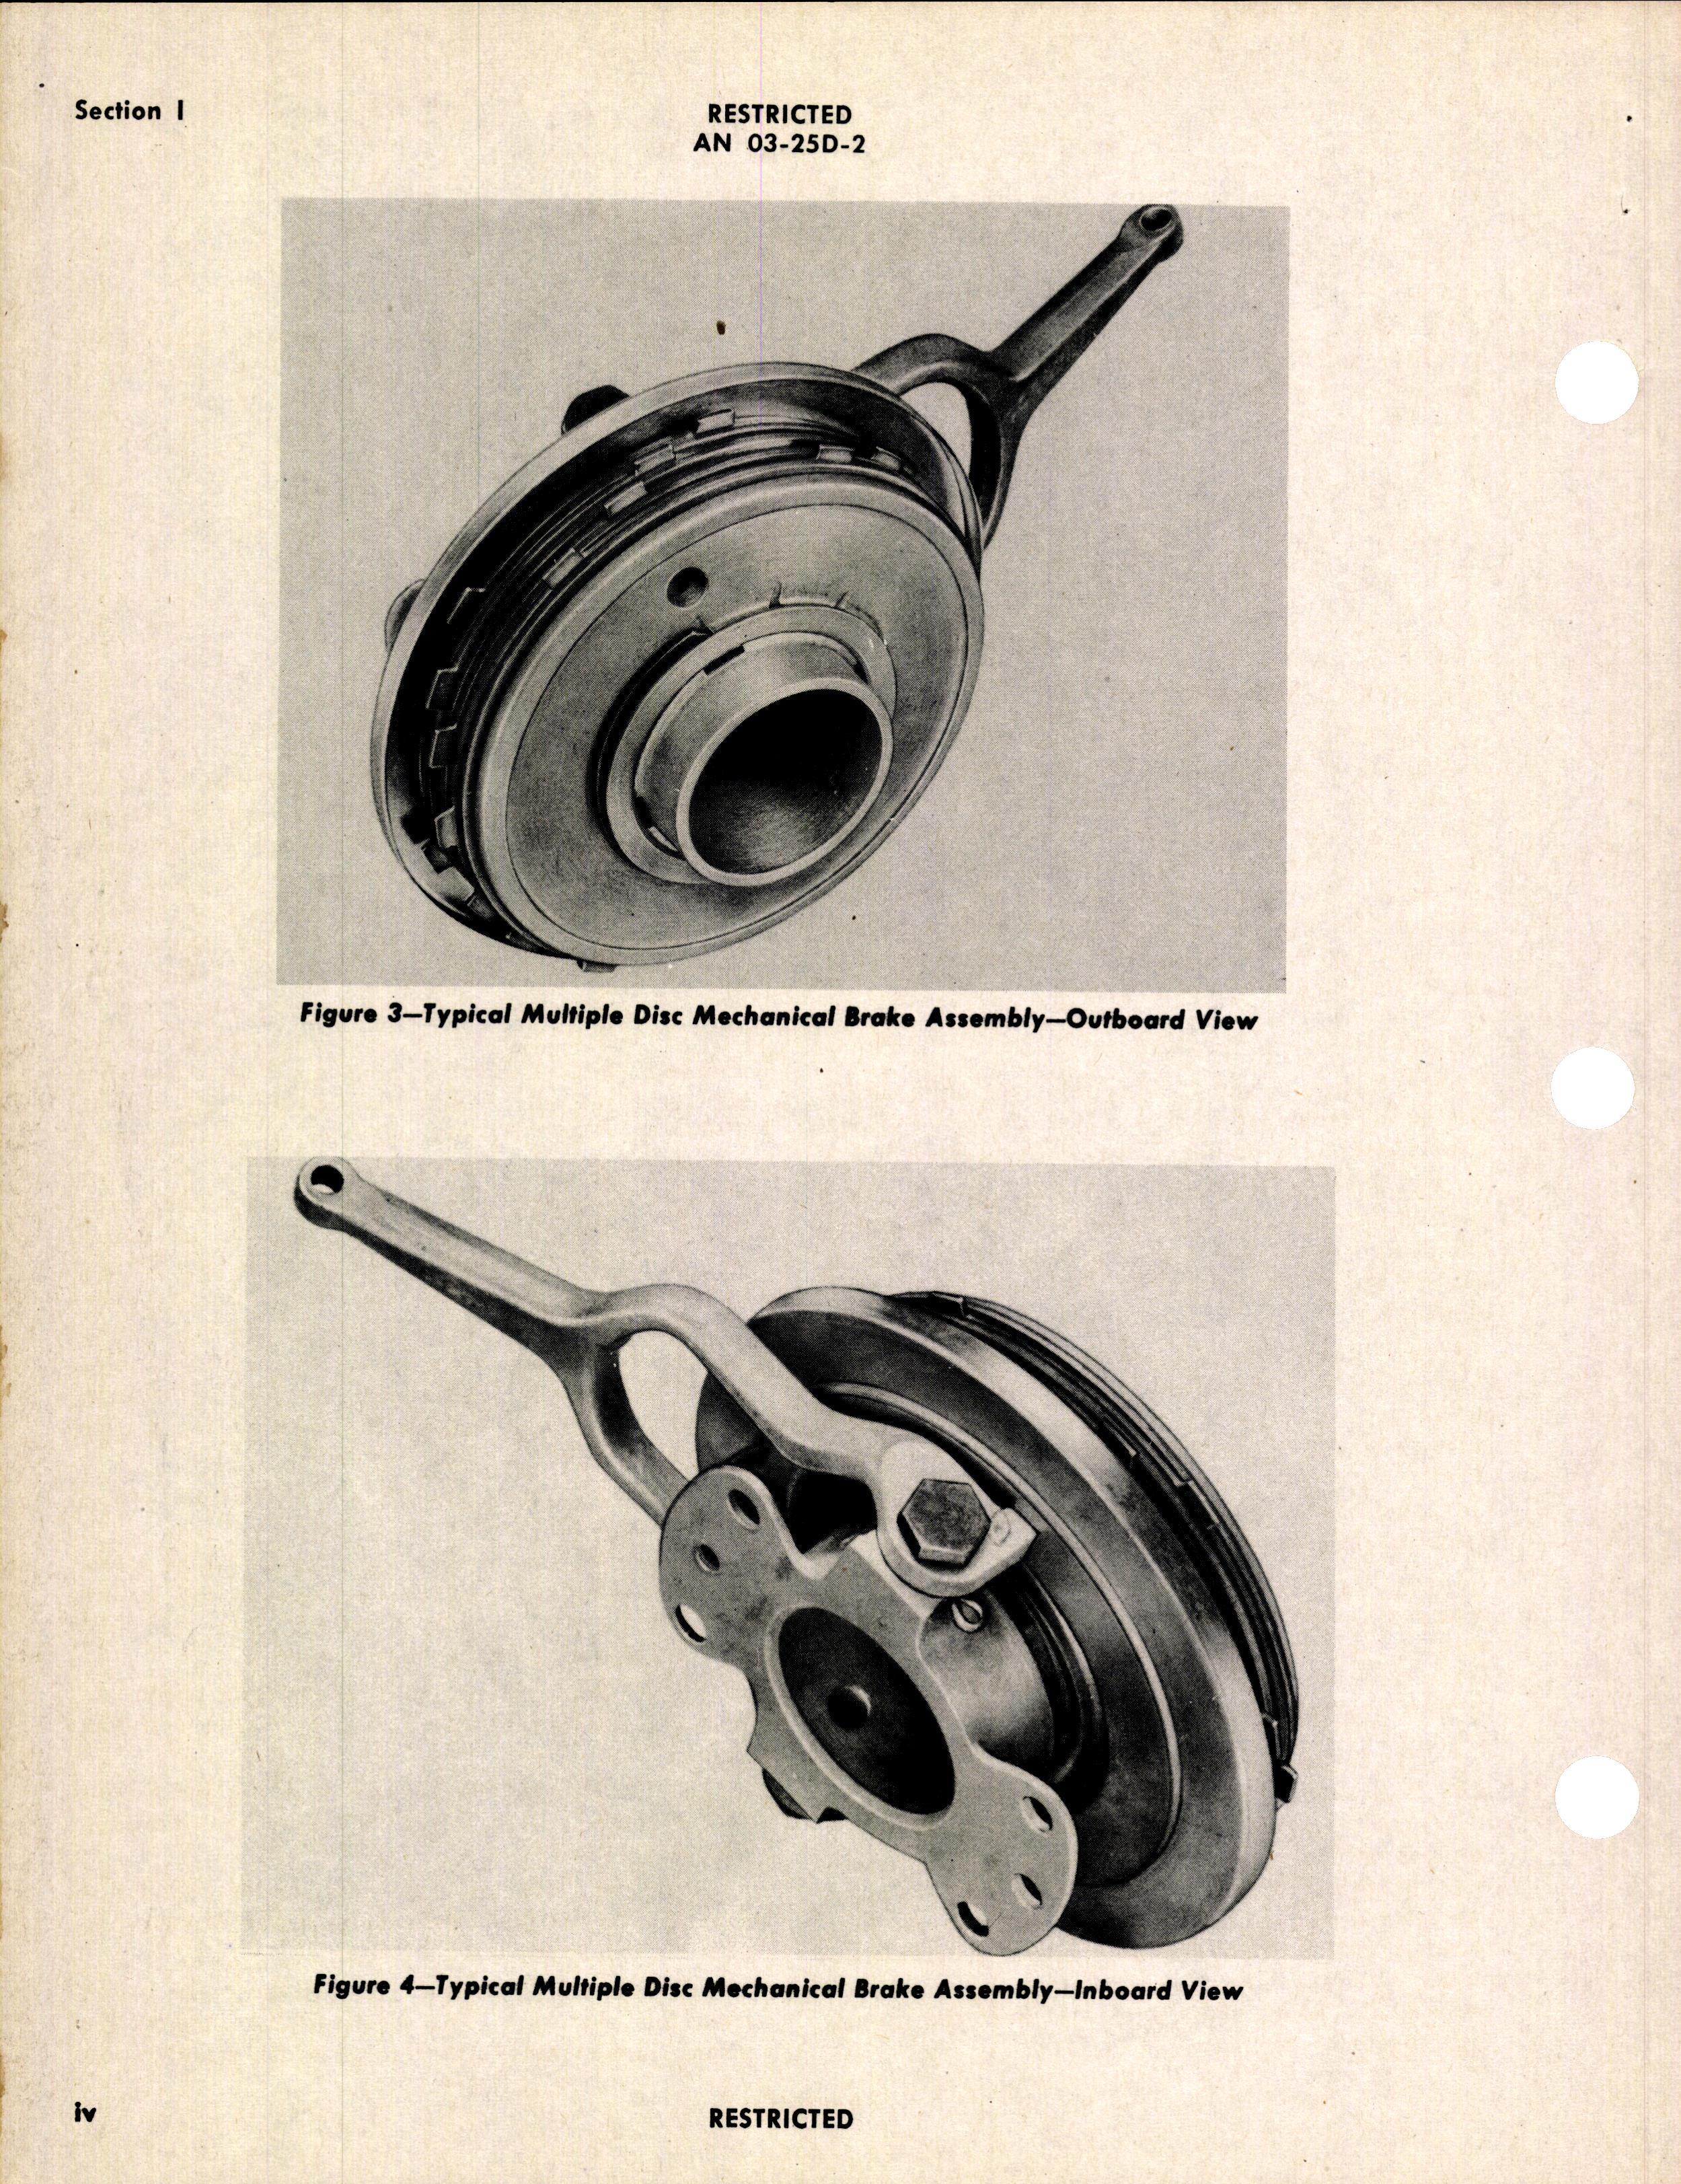 Sample page 6 from AirCorps Library document: Operation, Service, & Overhaul Instructions with Parts Catalog for Goodyear Multiple Disc Brakes